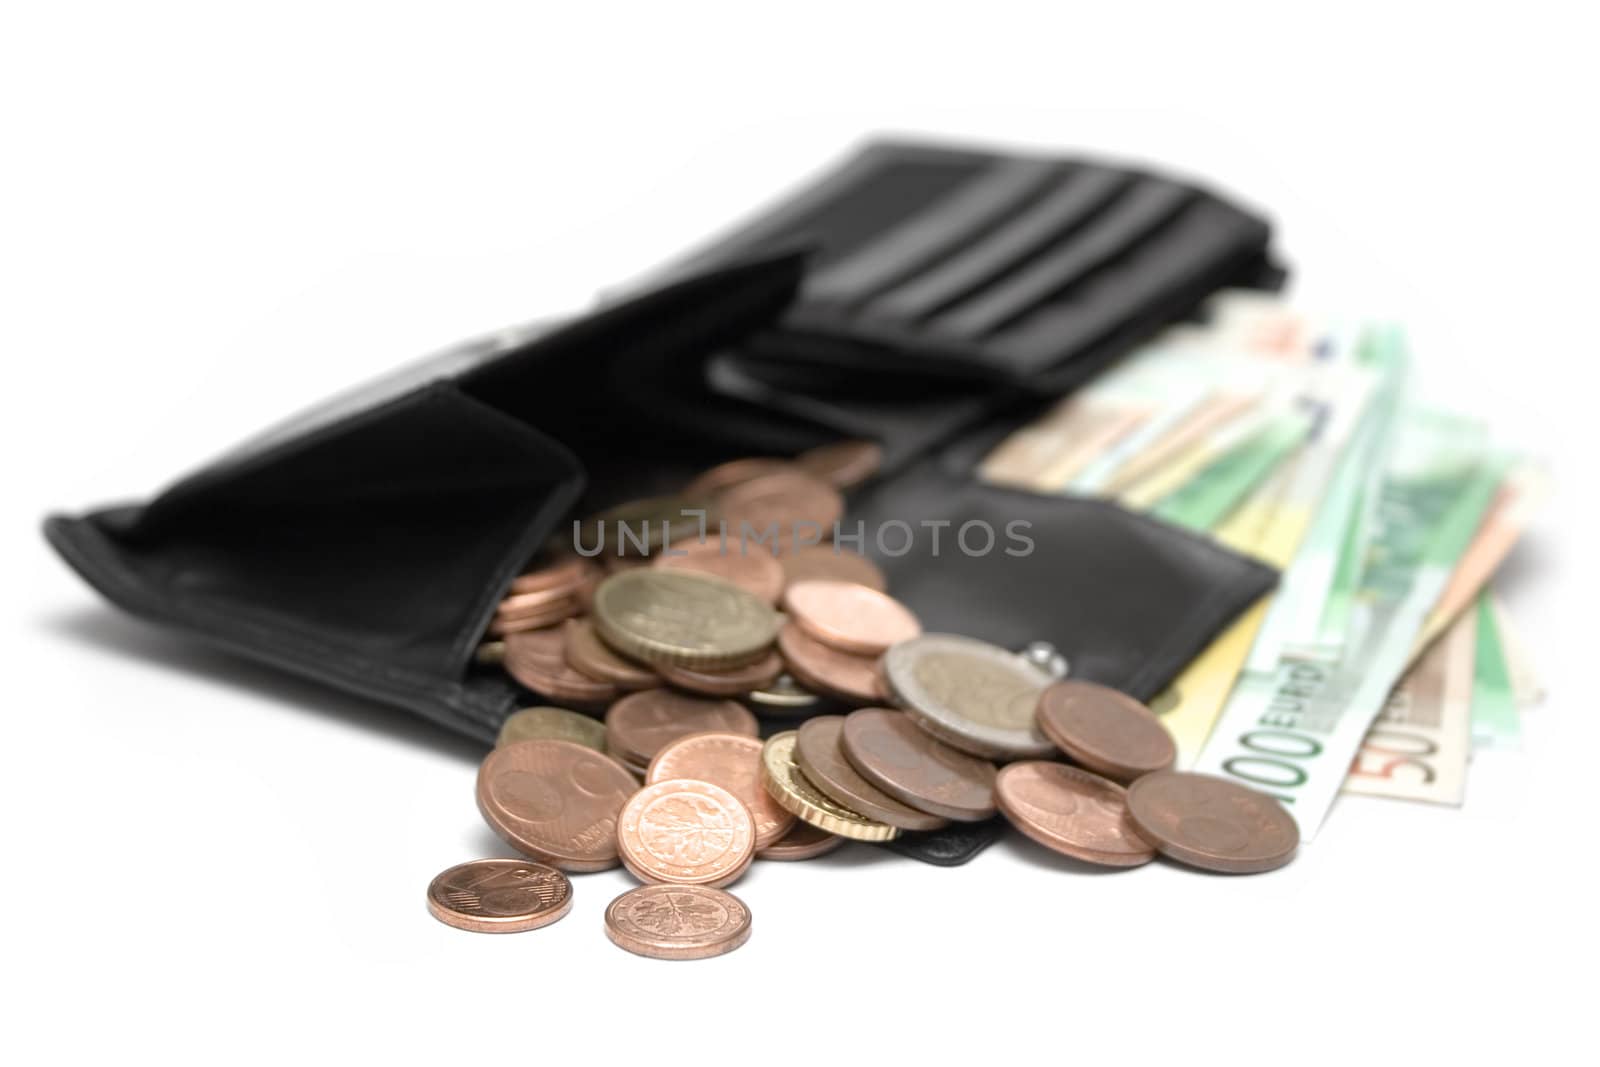 Black leather purse full of coins and banknotes. Isolated on a white background. Shallow depth of field.